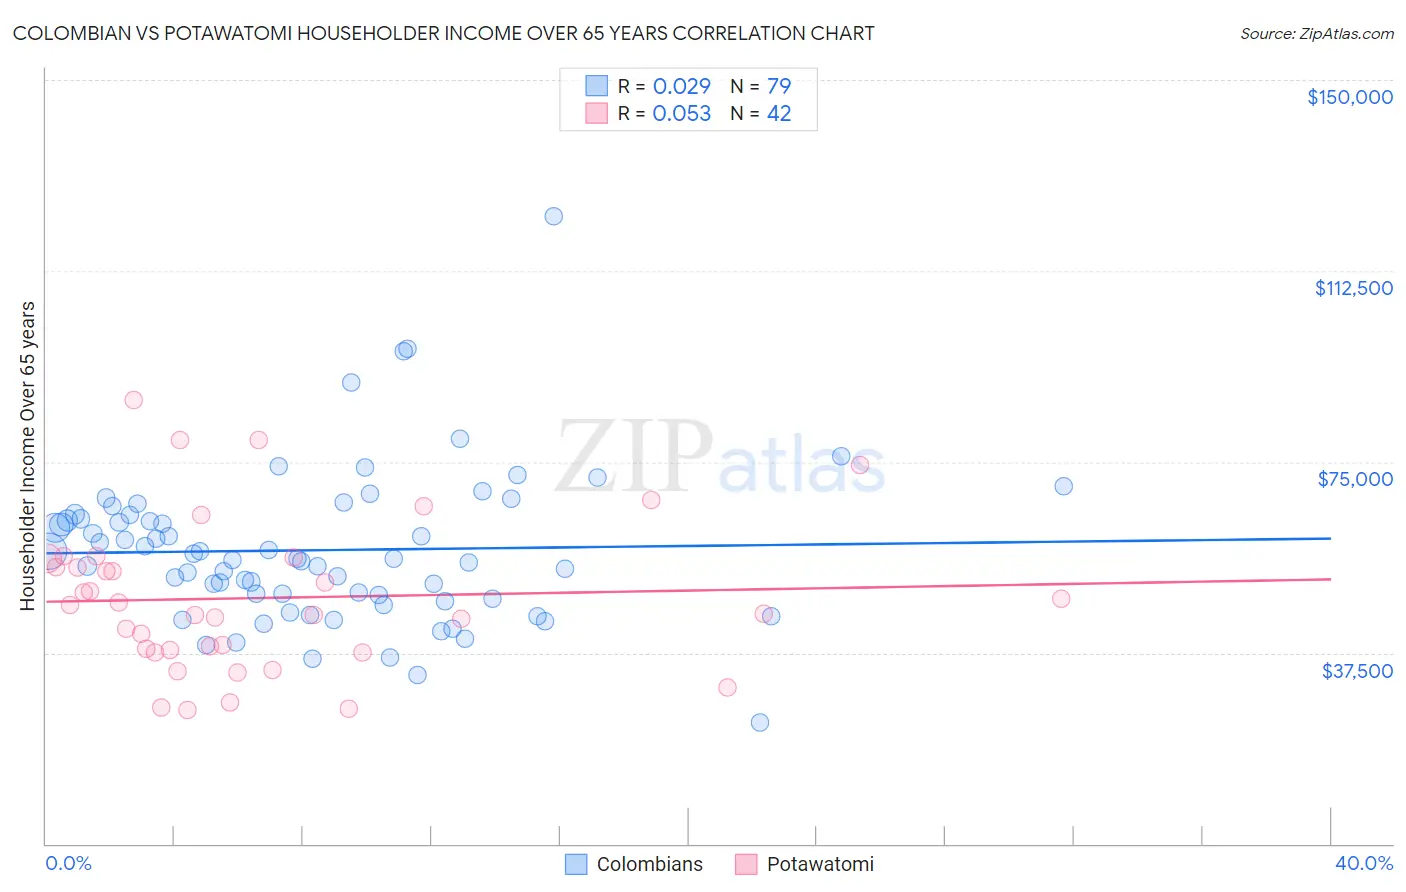 Colombian vs Potawatomi Householder Income Over 65 years